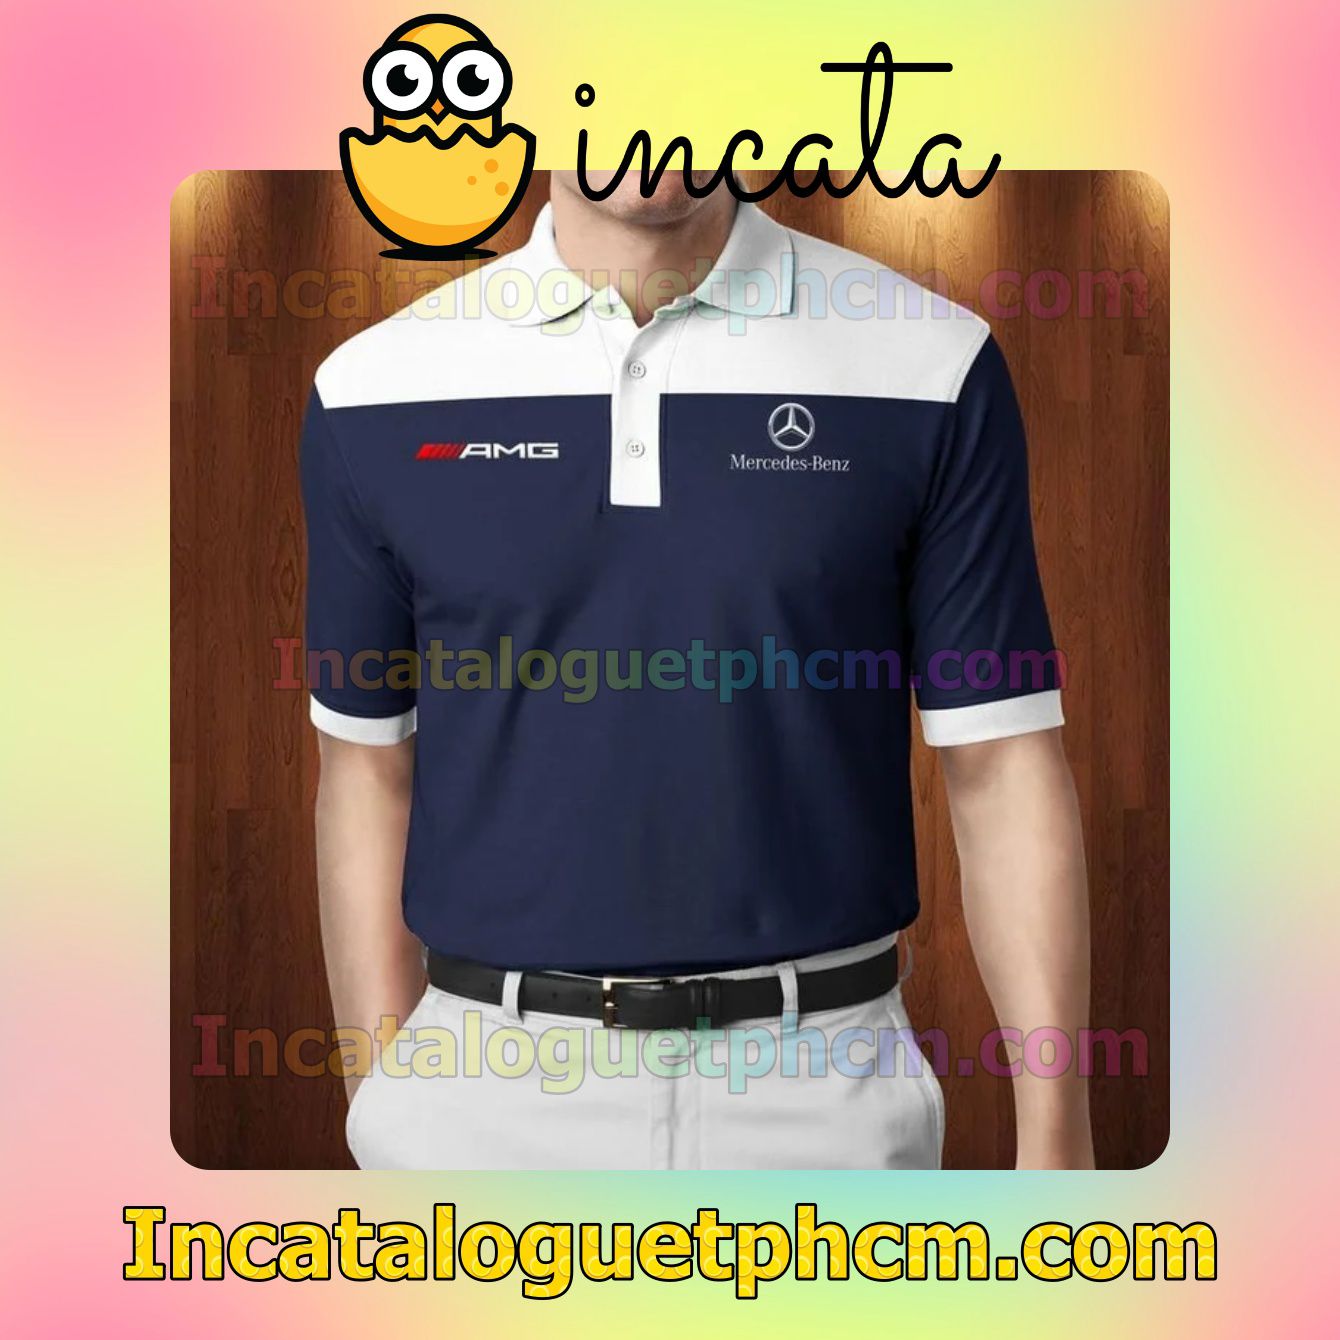 Mercedes Benz Amg Navy And White Polo Gift For Men Dad